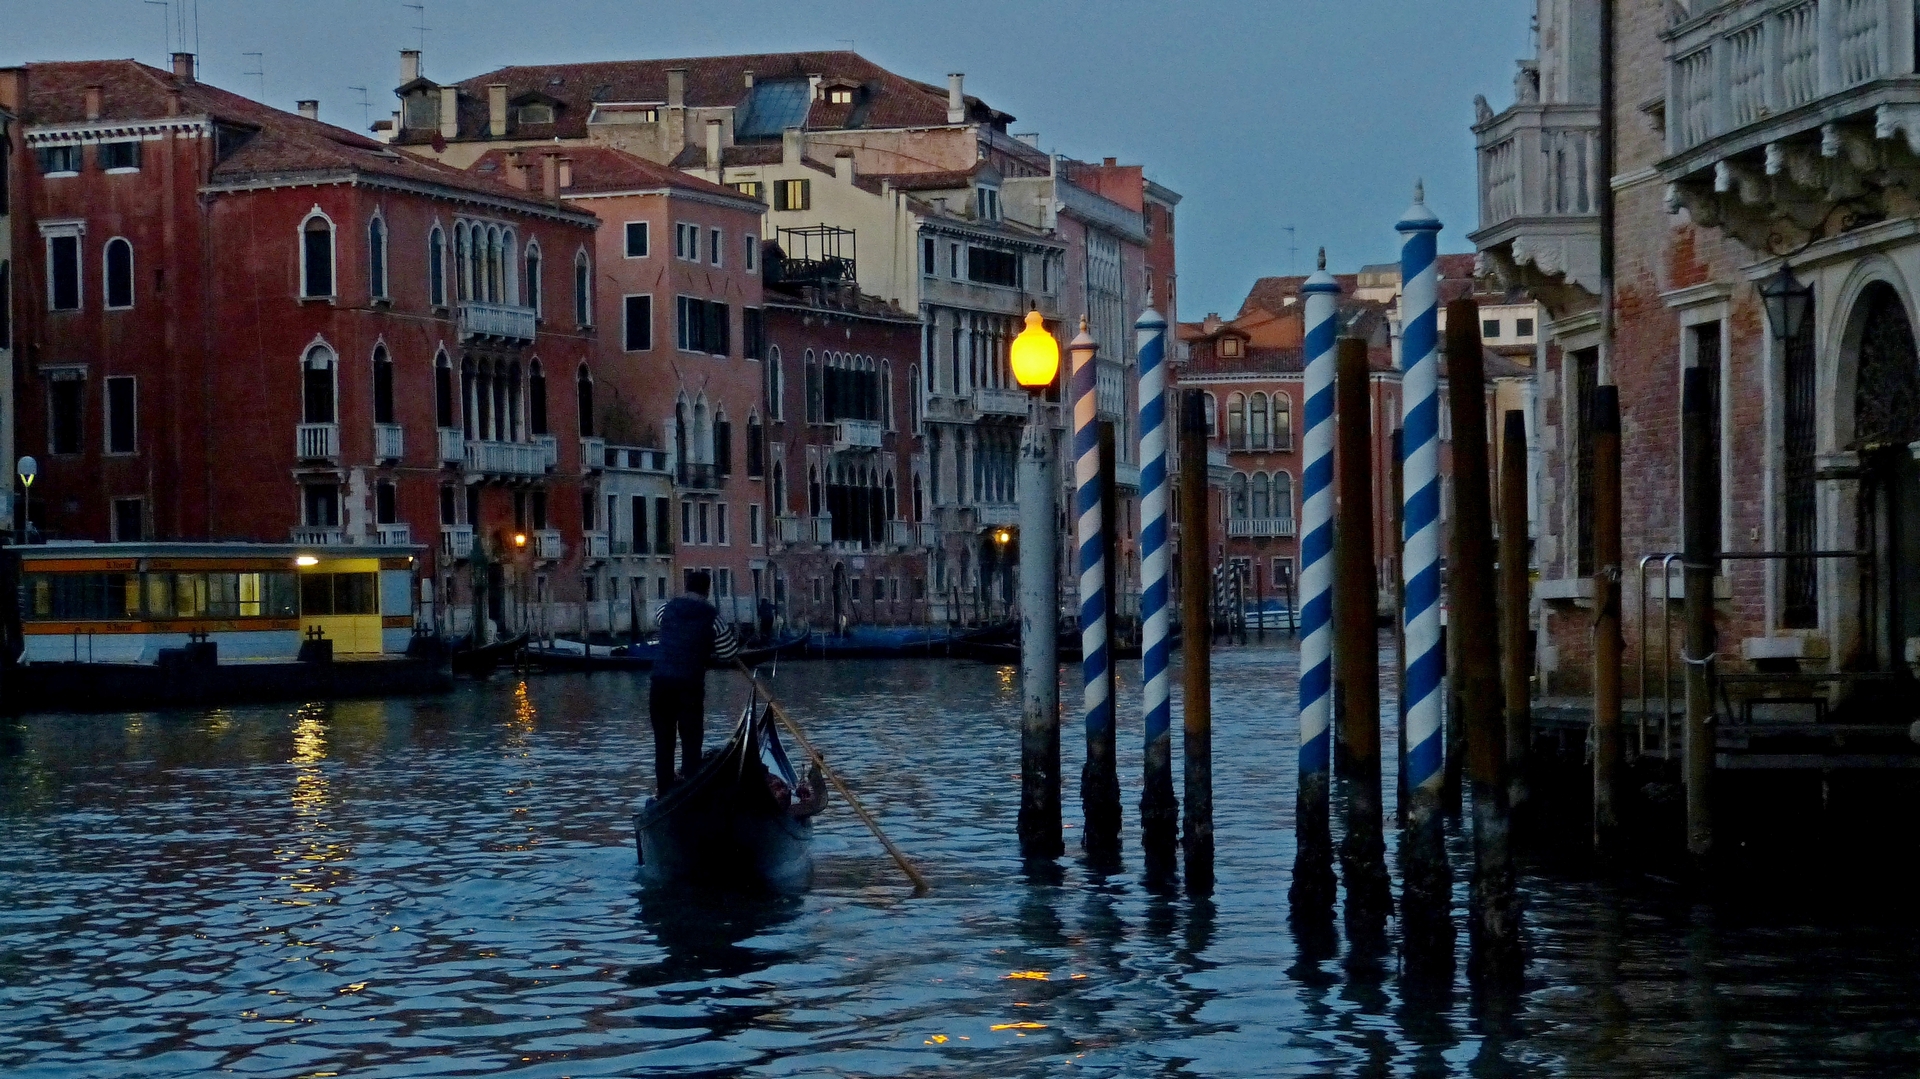 The evening is another Venice...